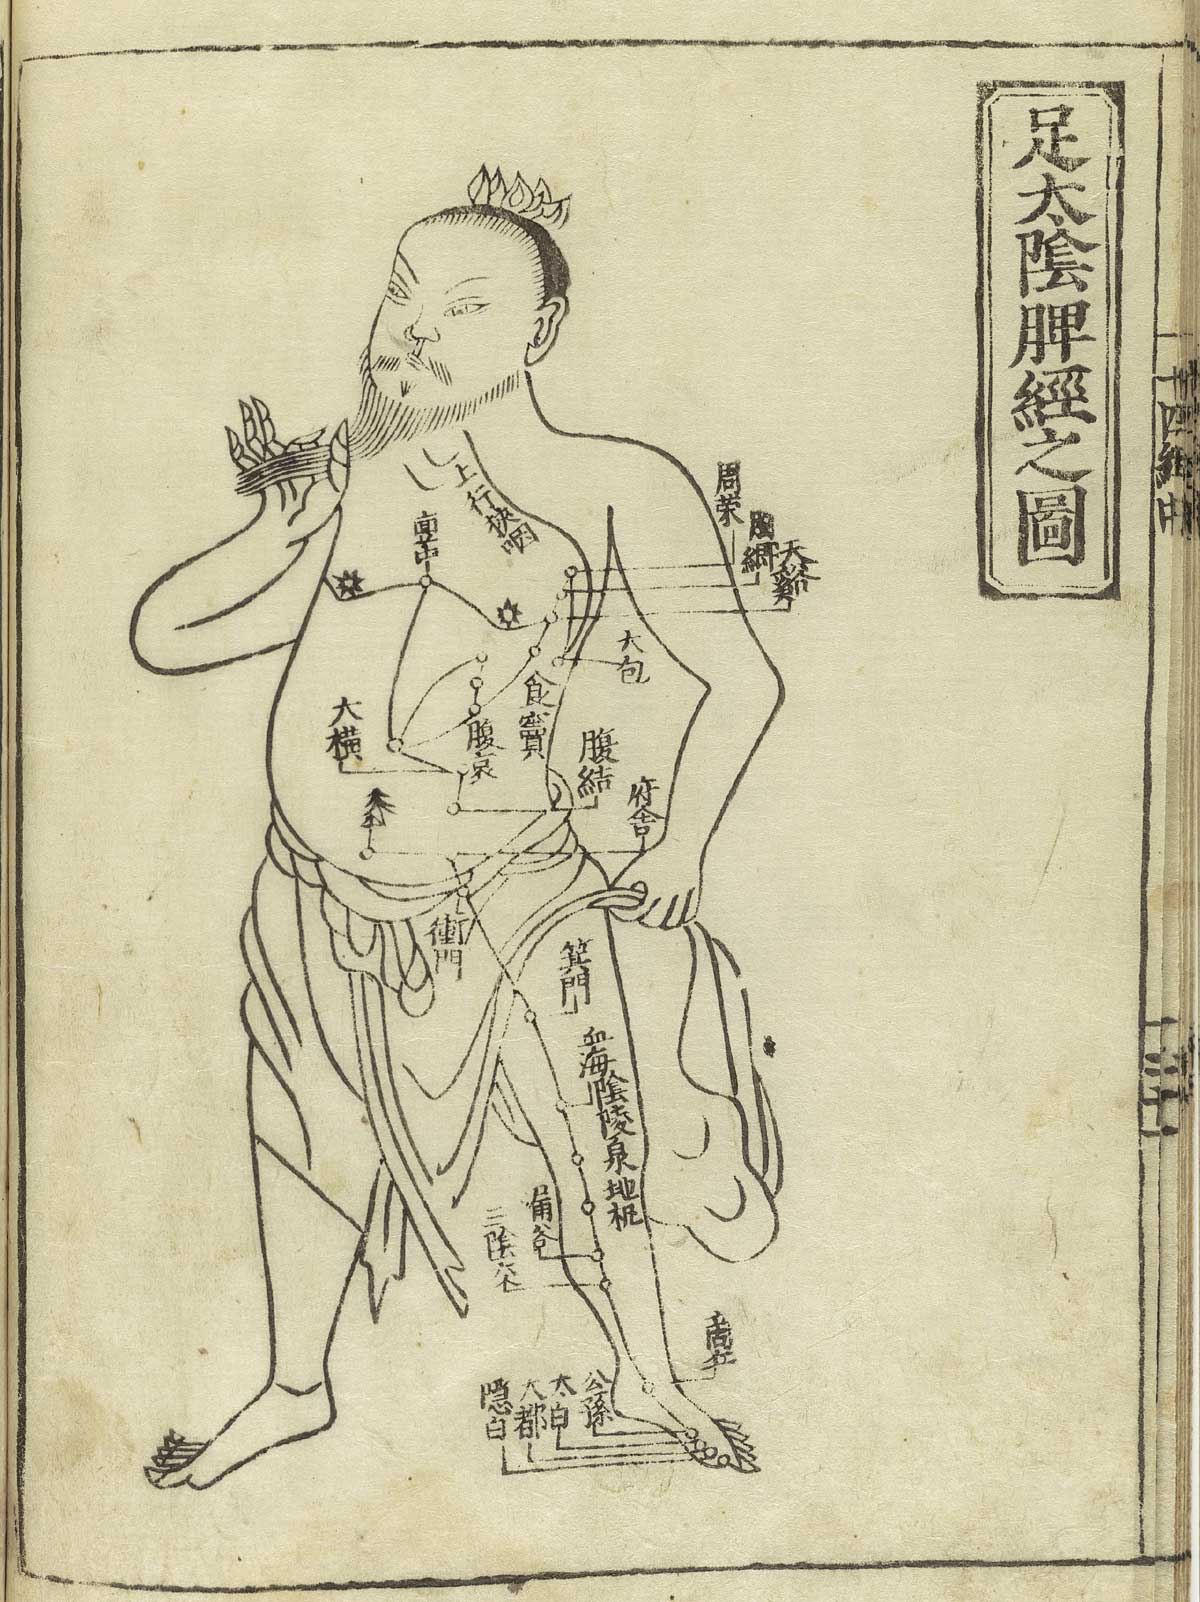 Woodcut showing the Jueyin liver meridian of foot of a standing male facing figure wearing a loin cloth with meridians indicated down the chest and leg with Chinese characters giving names of the points, from Hua Shou’s Jushikei hakki, NLM Call no.: WZ 260 H868s 1716.